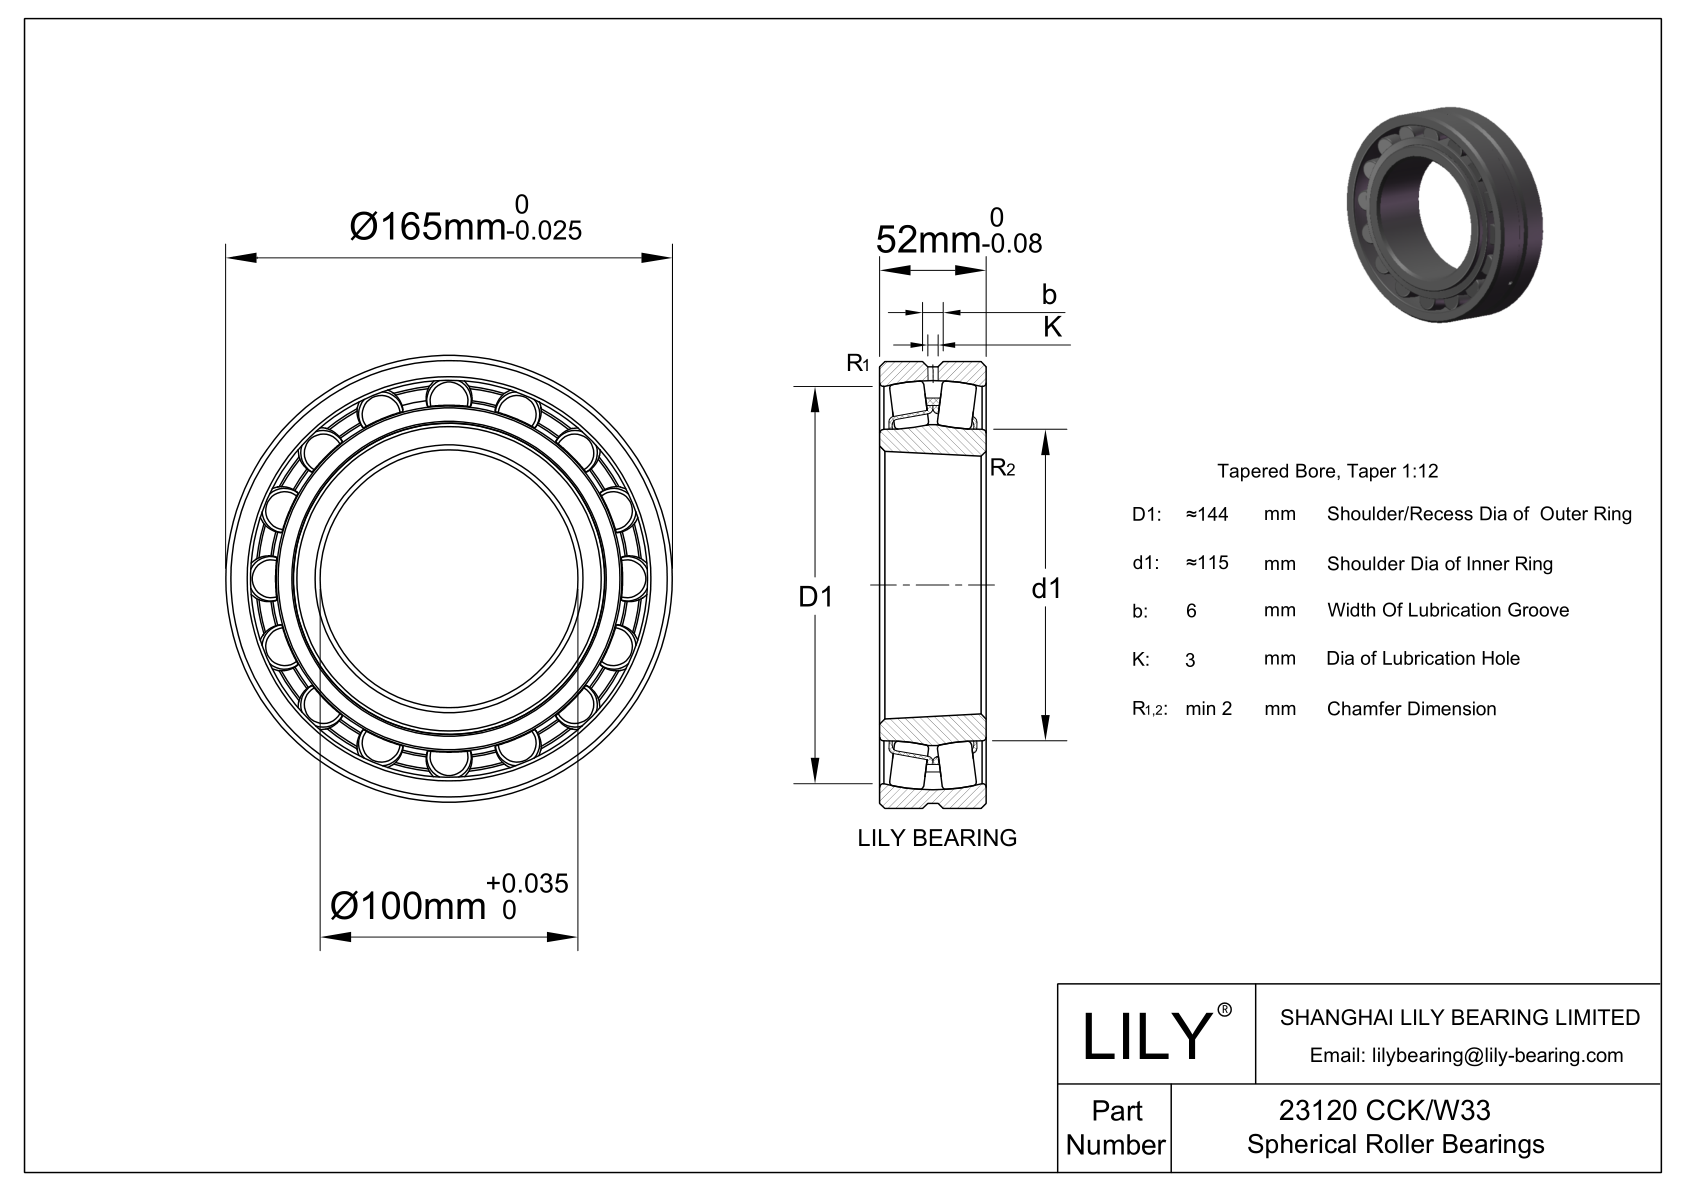 23120 CCK/W33 Double Row Spherical Roller Bearing cad drawing